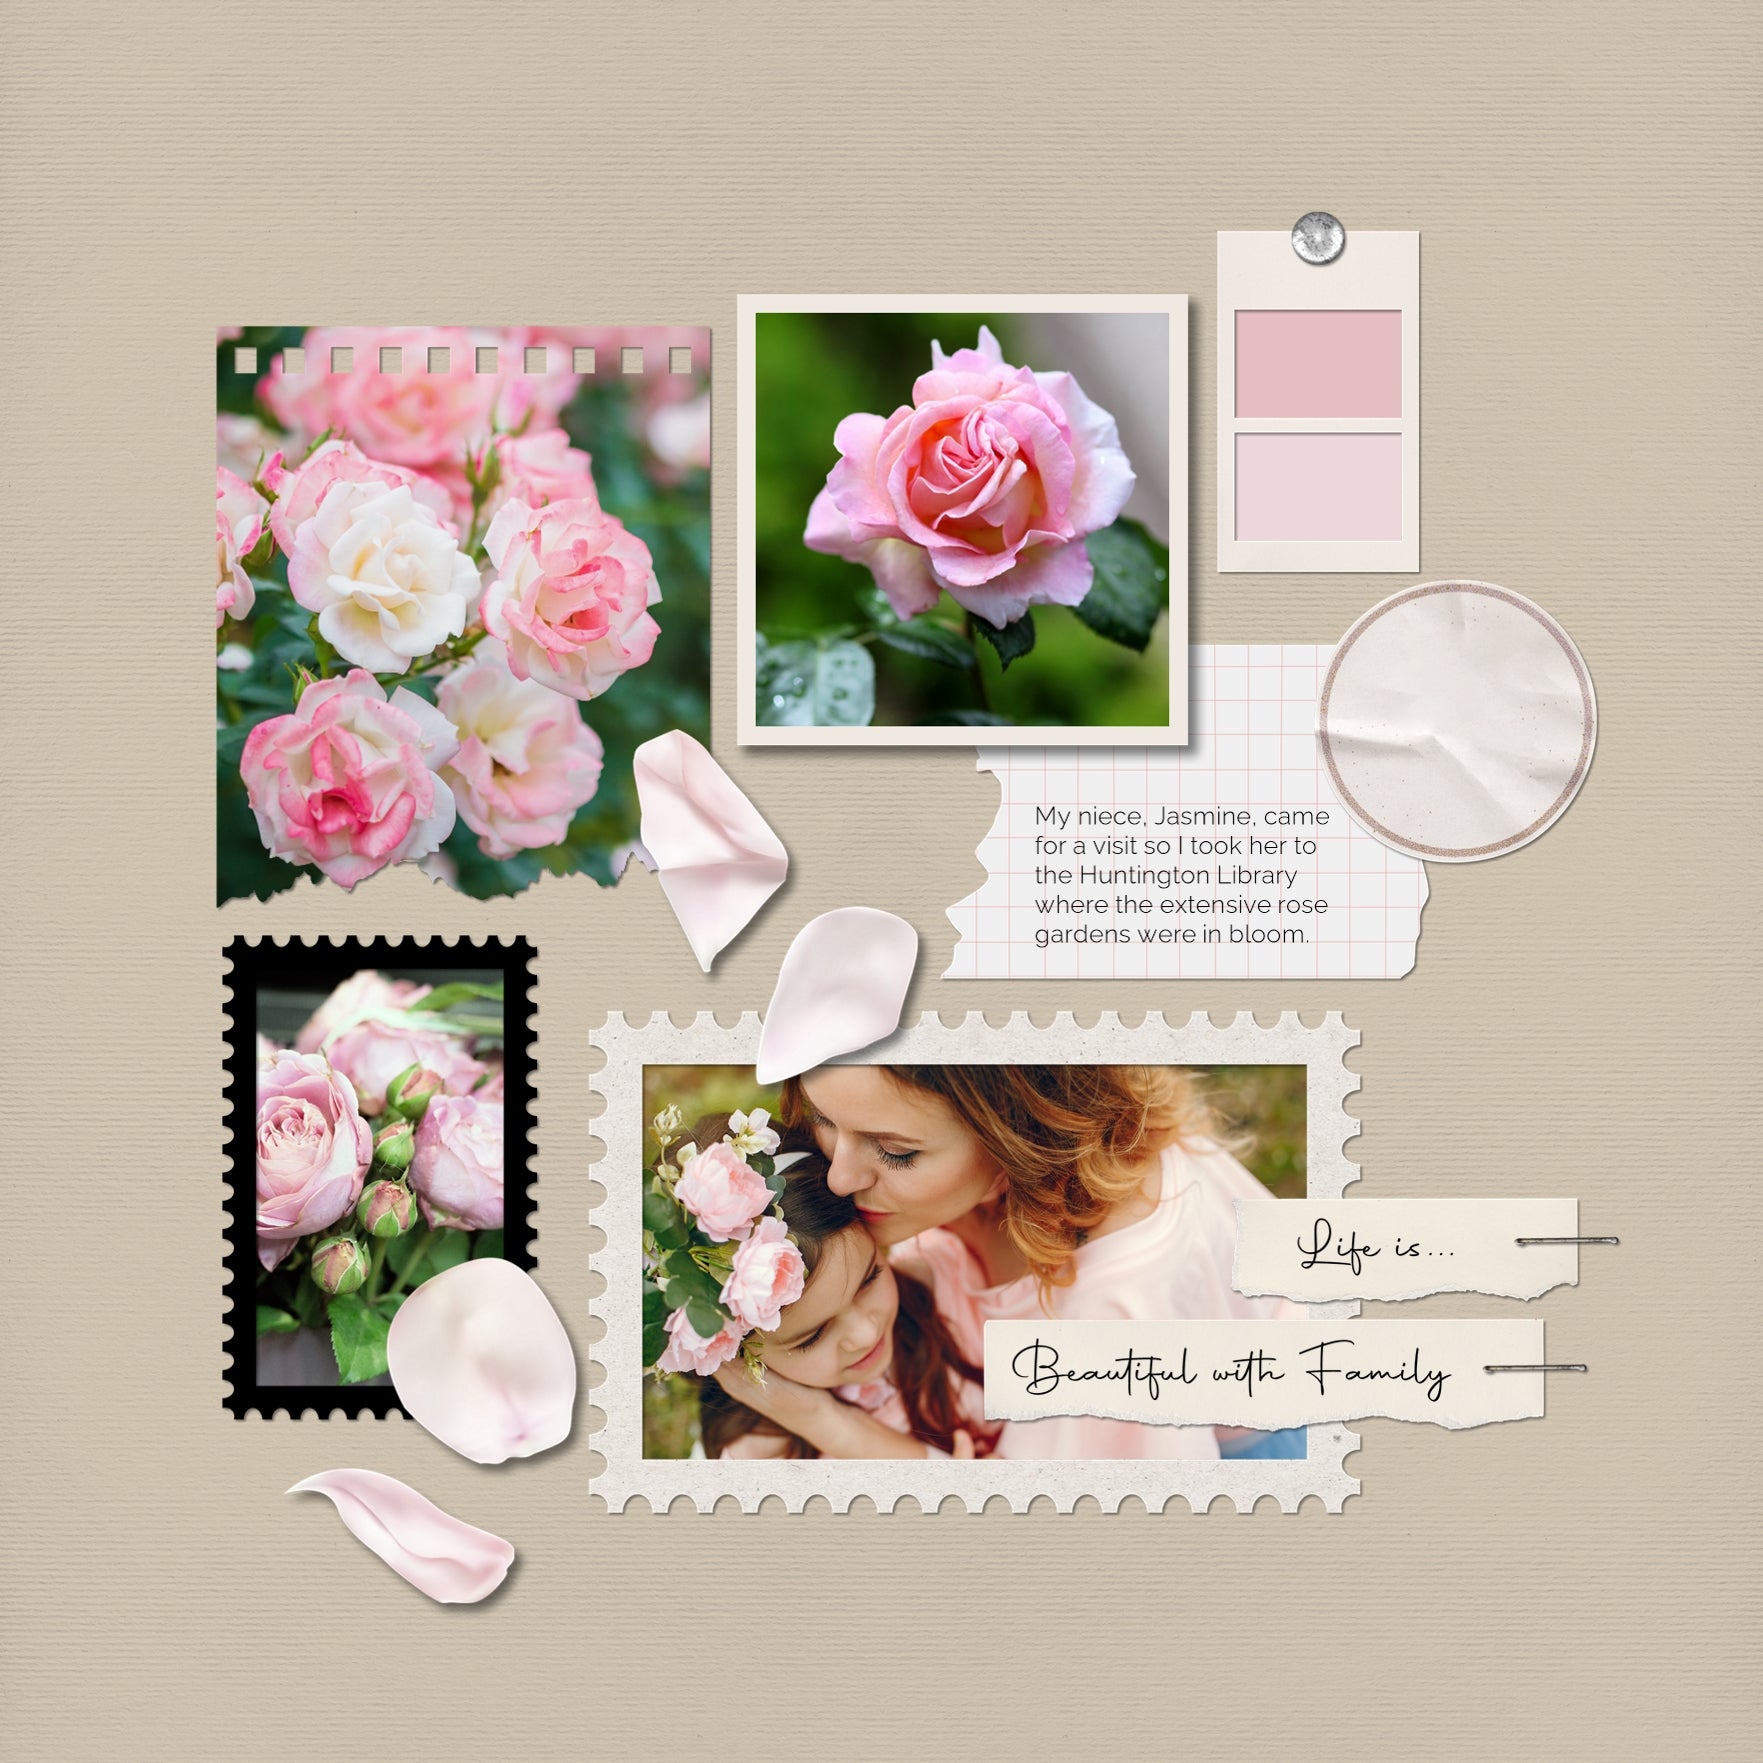 Designed with spring and early summer in mind, these beautiful embellishments and papers by Lucky Girl Creative highlight a color palette which is completely customizable and meant to accent your photos no matter the theme or occasion. Versatile enough for everyday, the bits of nature are designed to accent your favorite photos and allow your creativity to soar.